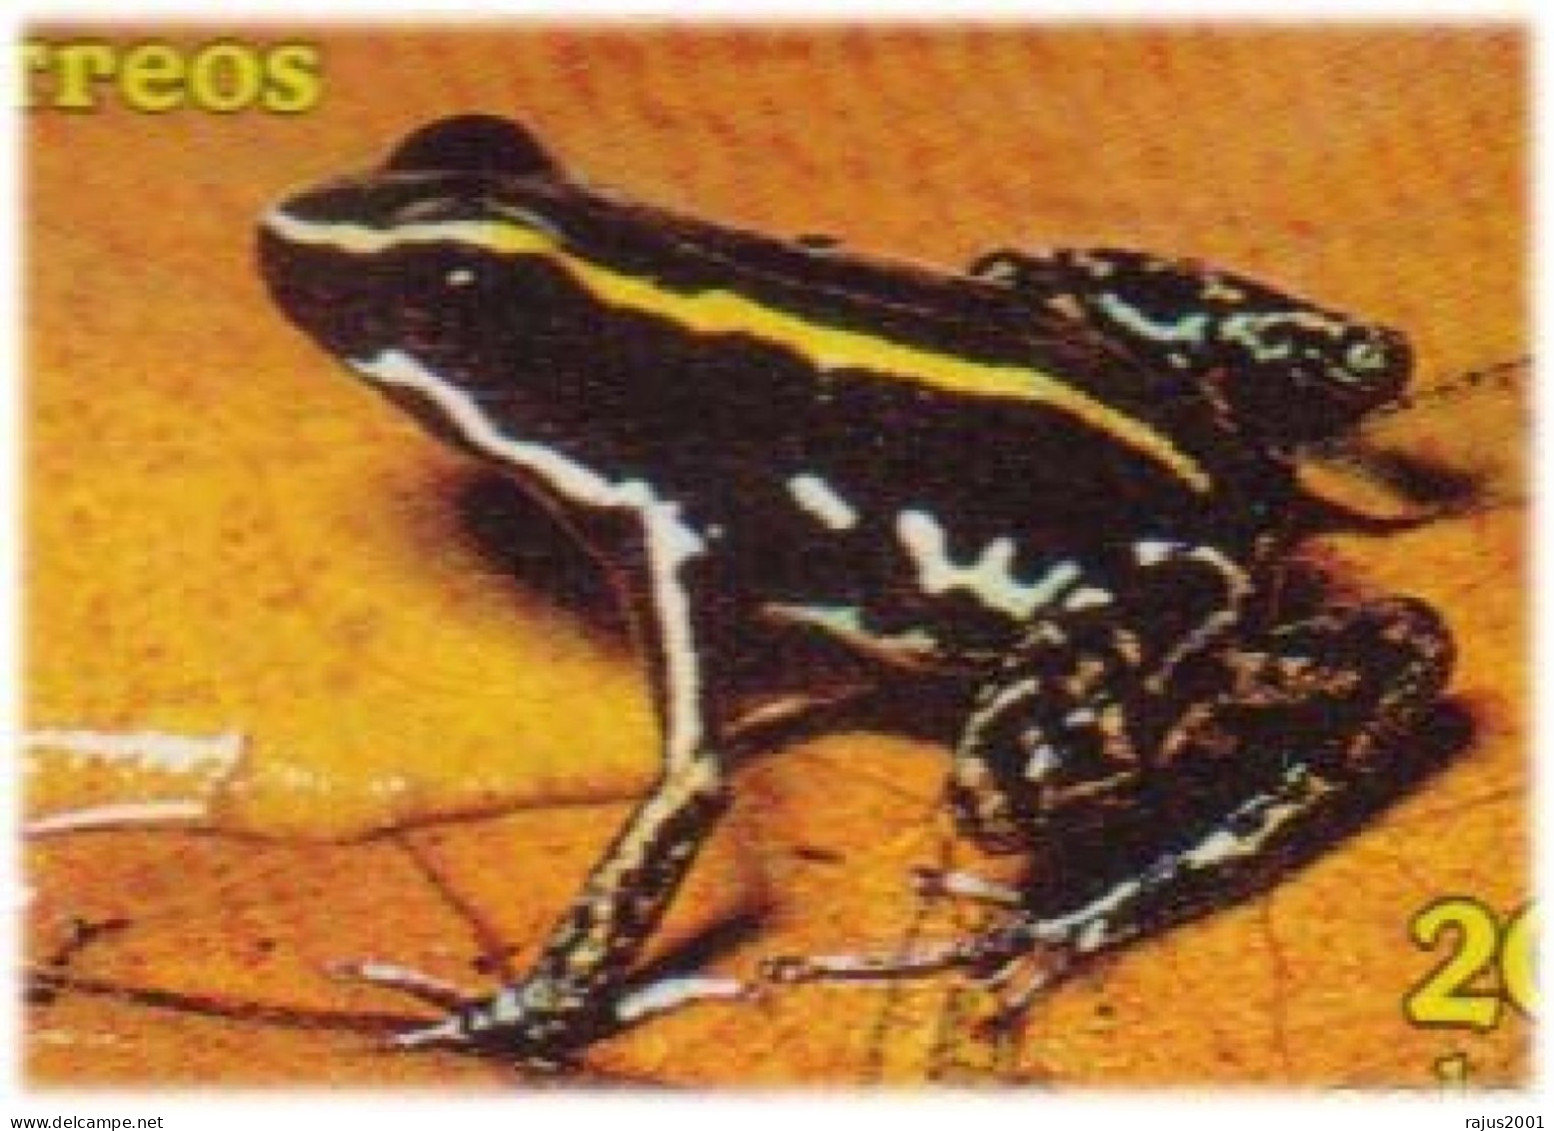 Phyllobates Lugubris Lovely Poison Frog, Hourglass Tree Frog, Blue Jeans Strawberry Poison Frog, Harmful Animal FDC - Frogs